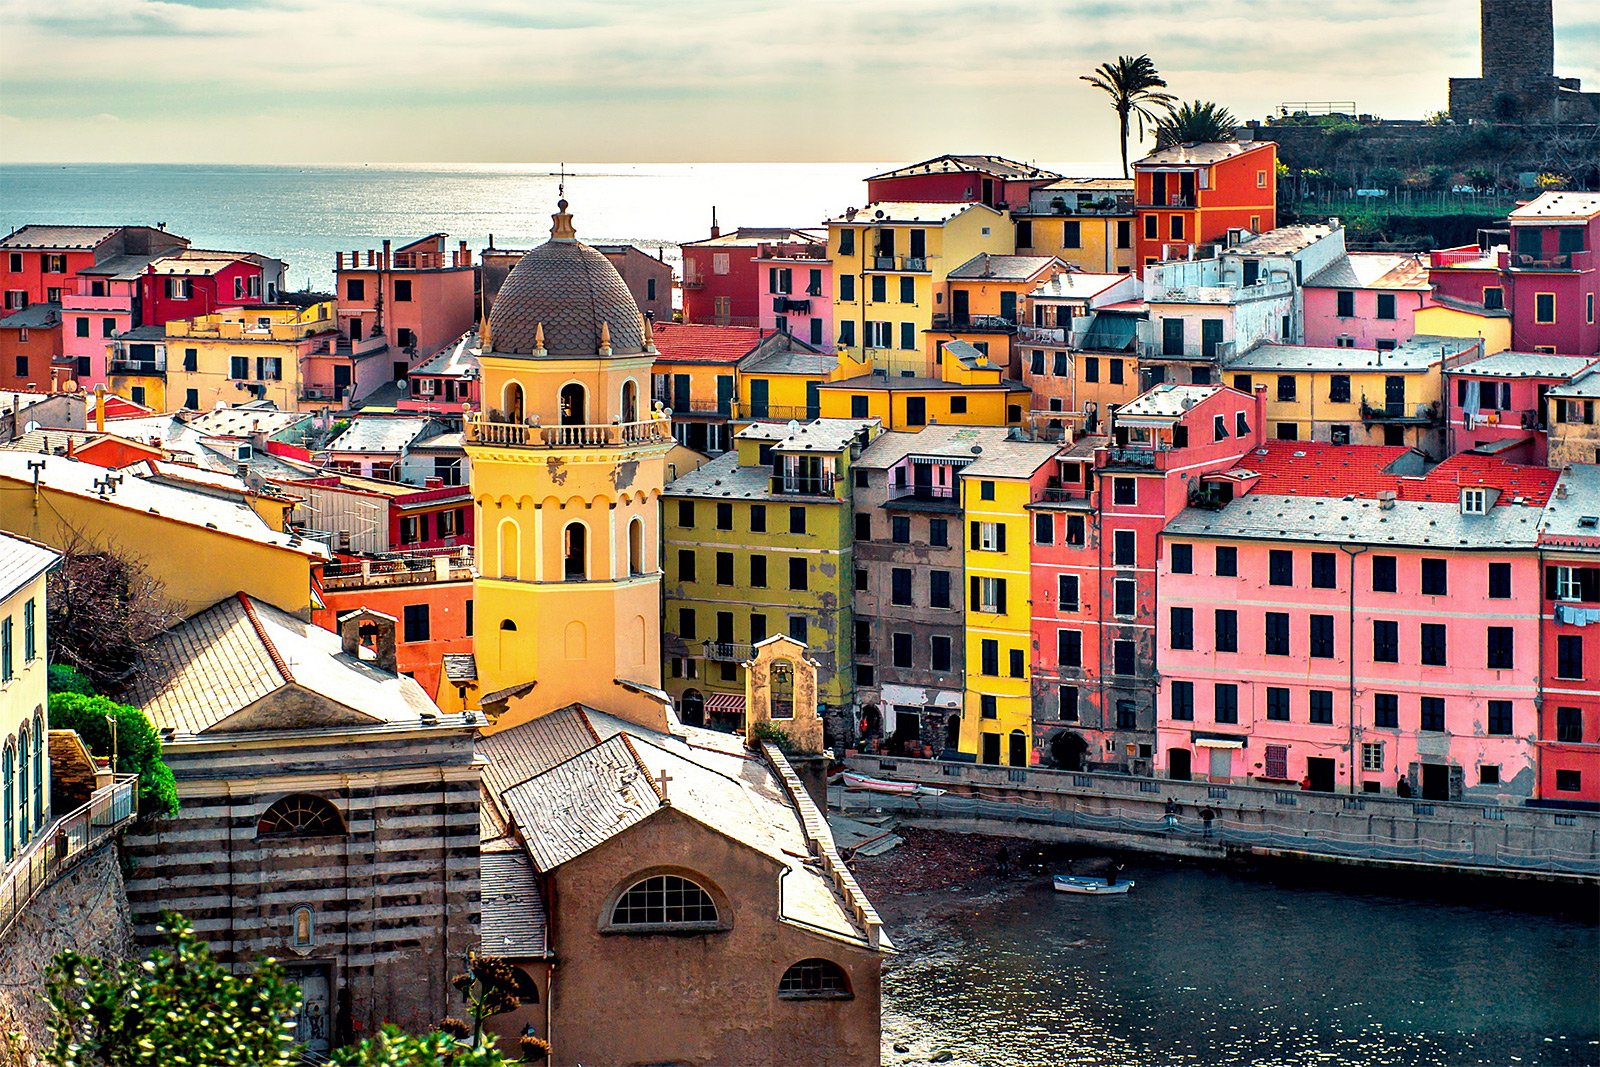 How to take a walk on Vernazza in Genoa